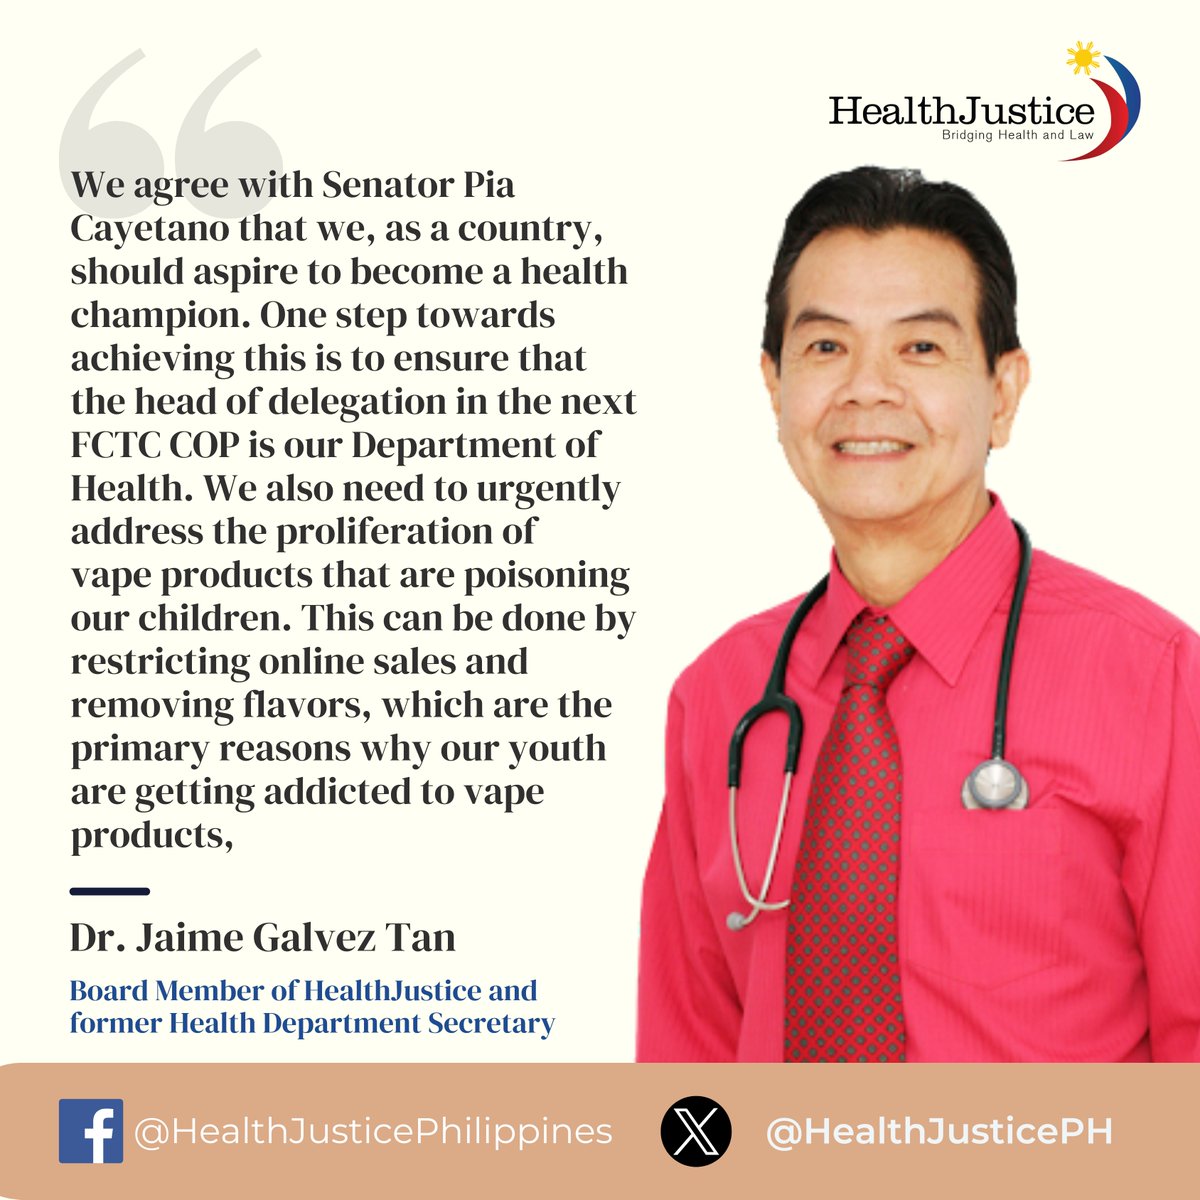 Public health advocacy group, HealthJustice, echoed Cayetano’s appeal to government officials in line with their campaign to end the vapedemic among young Filipinos.

read full article below:
healthjustice.ph/dirty-ashtray-…